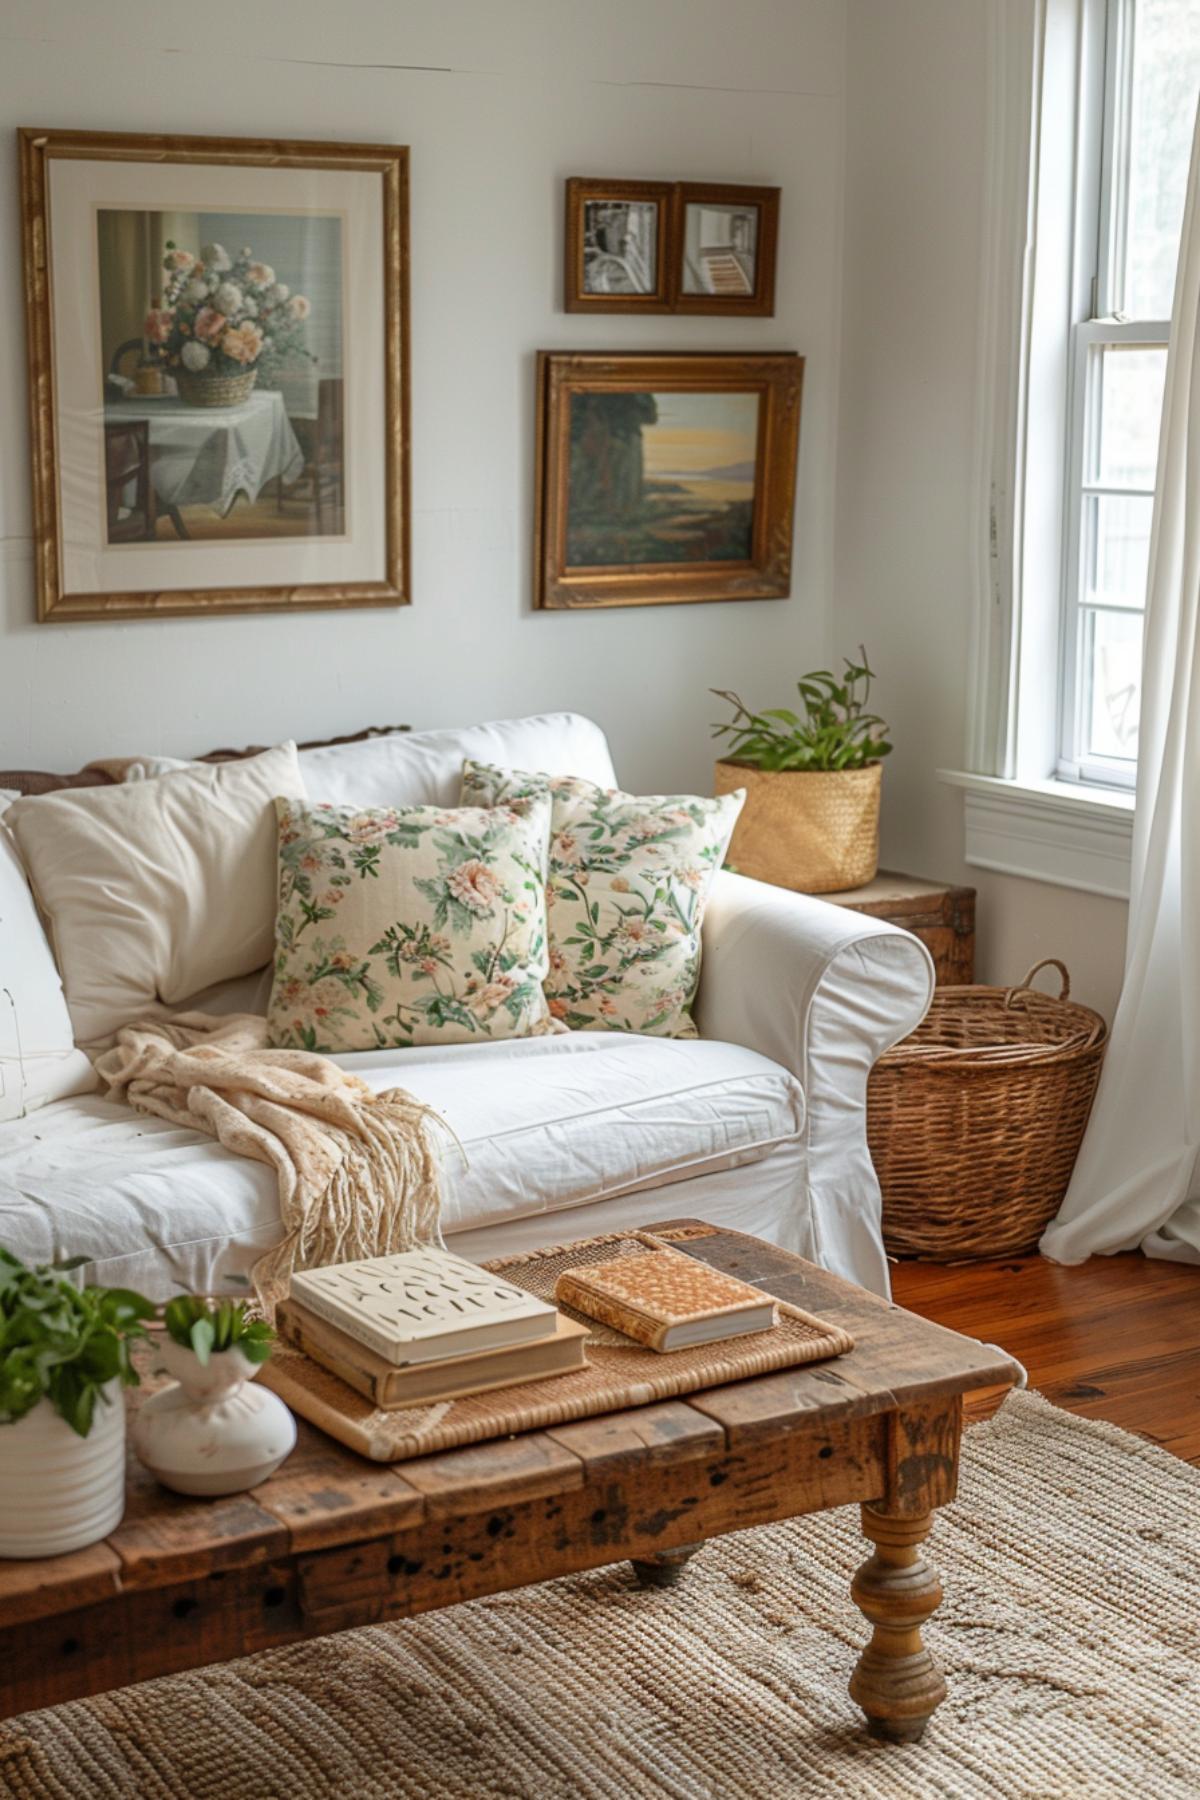 Dive into the cozy, charming world of Cottagecore with us! 🌿🏡 Get the lowdown on embracing a simpler, nature-filled lifestyle that's all about sustainability, crafting, and baking. Your guide to slowing down and living the dream, Cottagecore style.